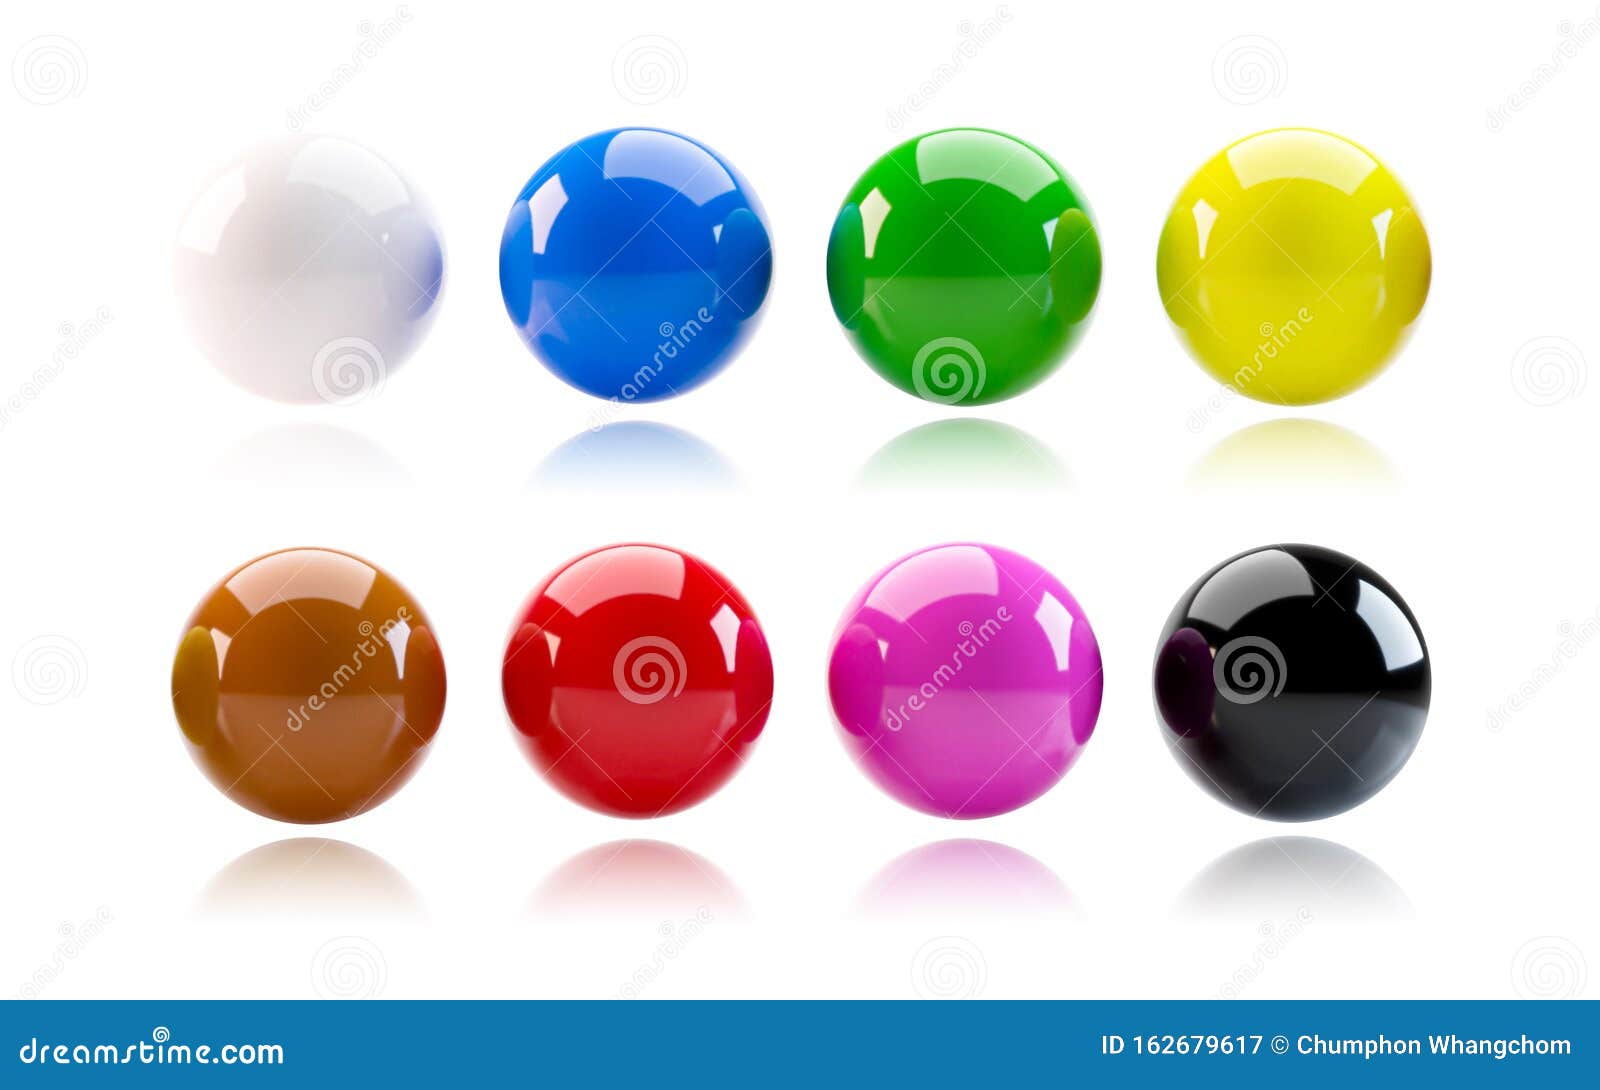 colorful billiards balls on white background with standard eight colors. 3d render of snooker pool balls object.  clipping path